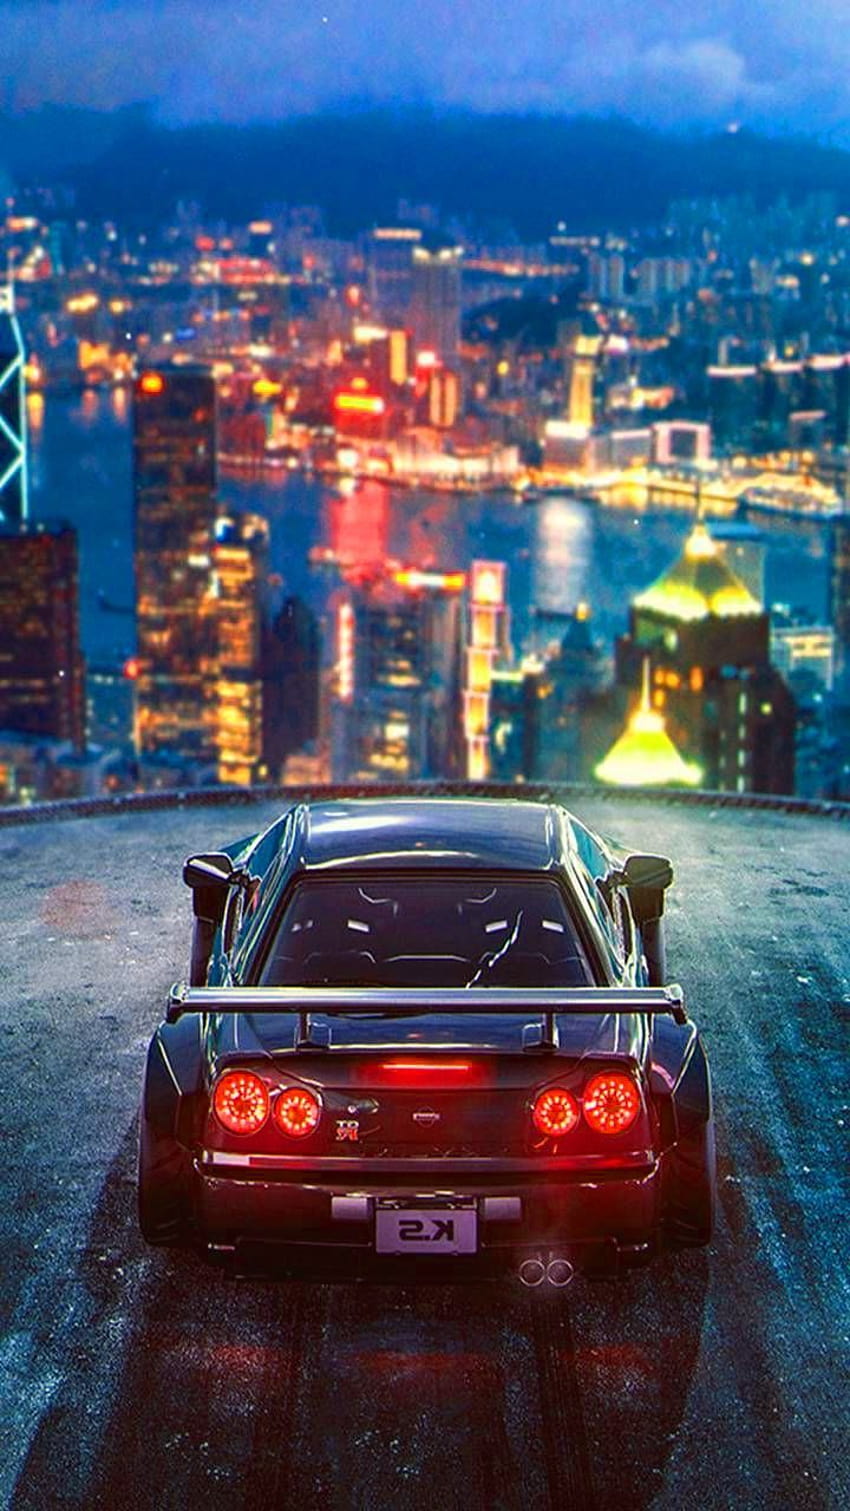 Jdm For Phone / Toyota Supra Need For Speed For Iphone And Gaming For Laptop Now For Toyota Supra Toyota Supra Mk4 Jdm, jdm phone HD phone wallpaper